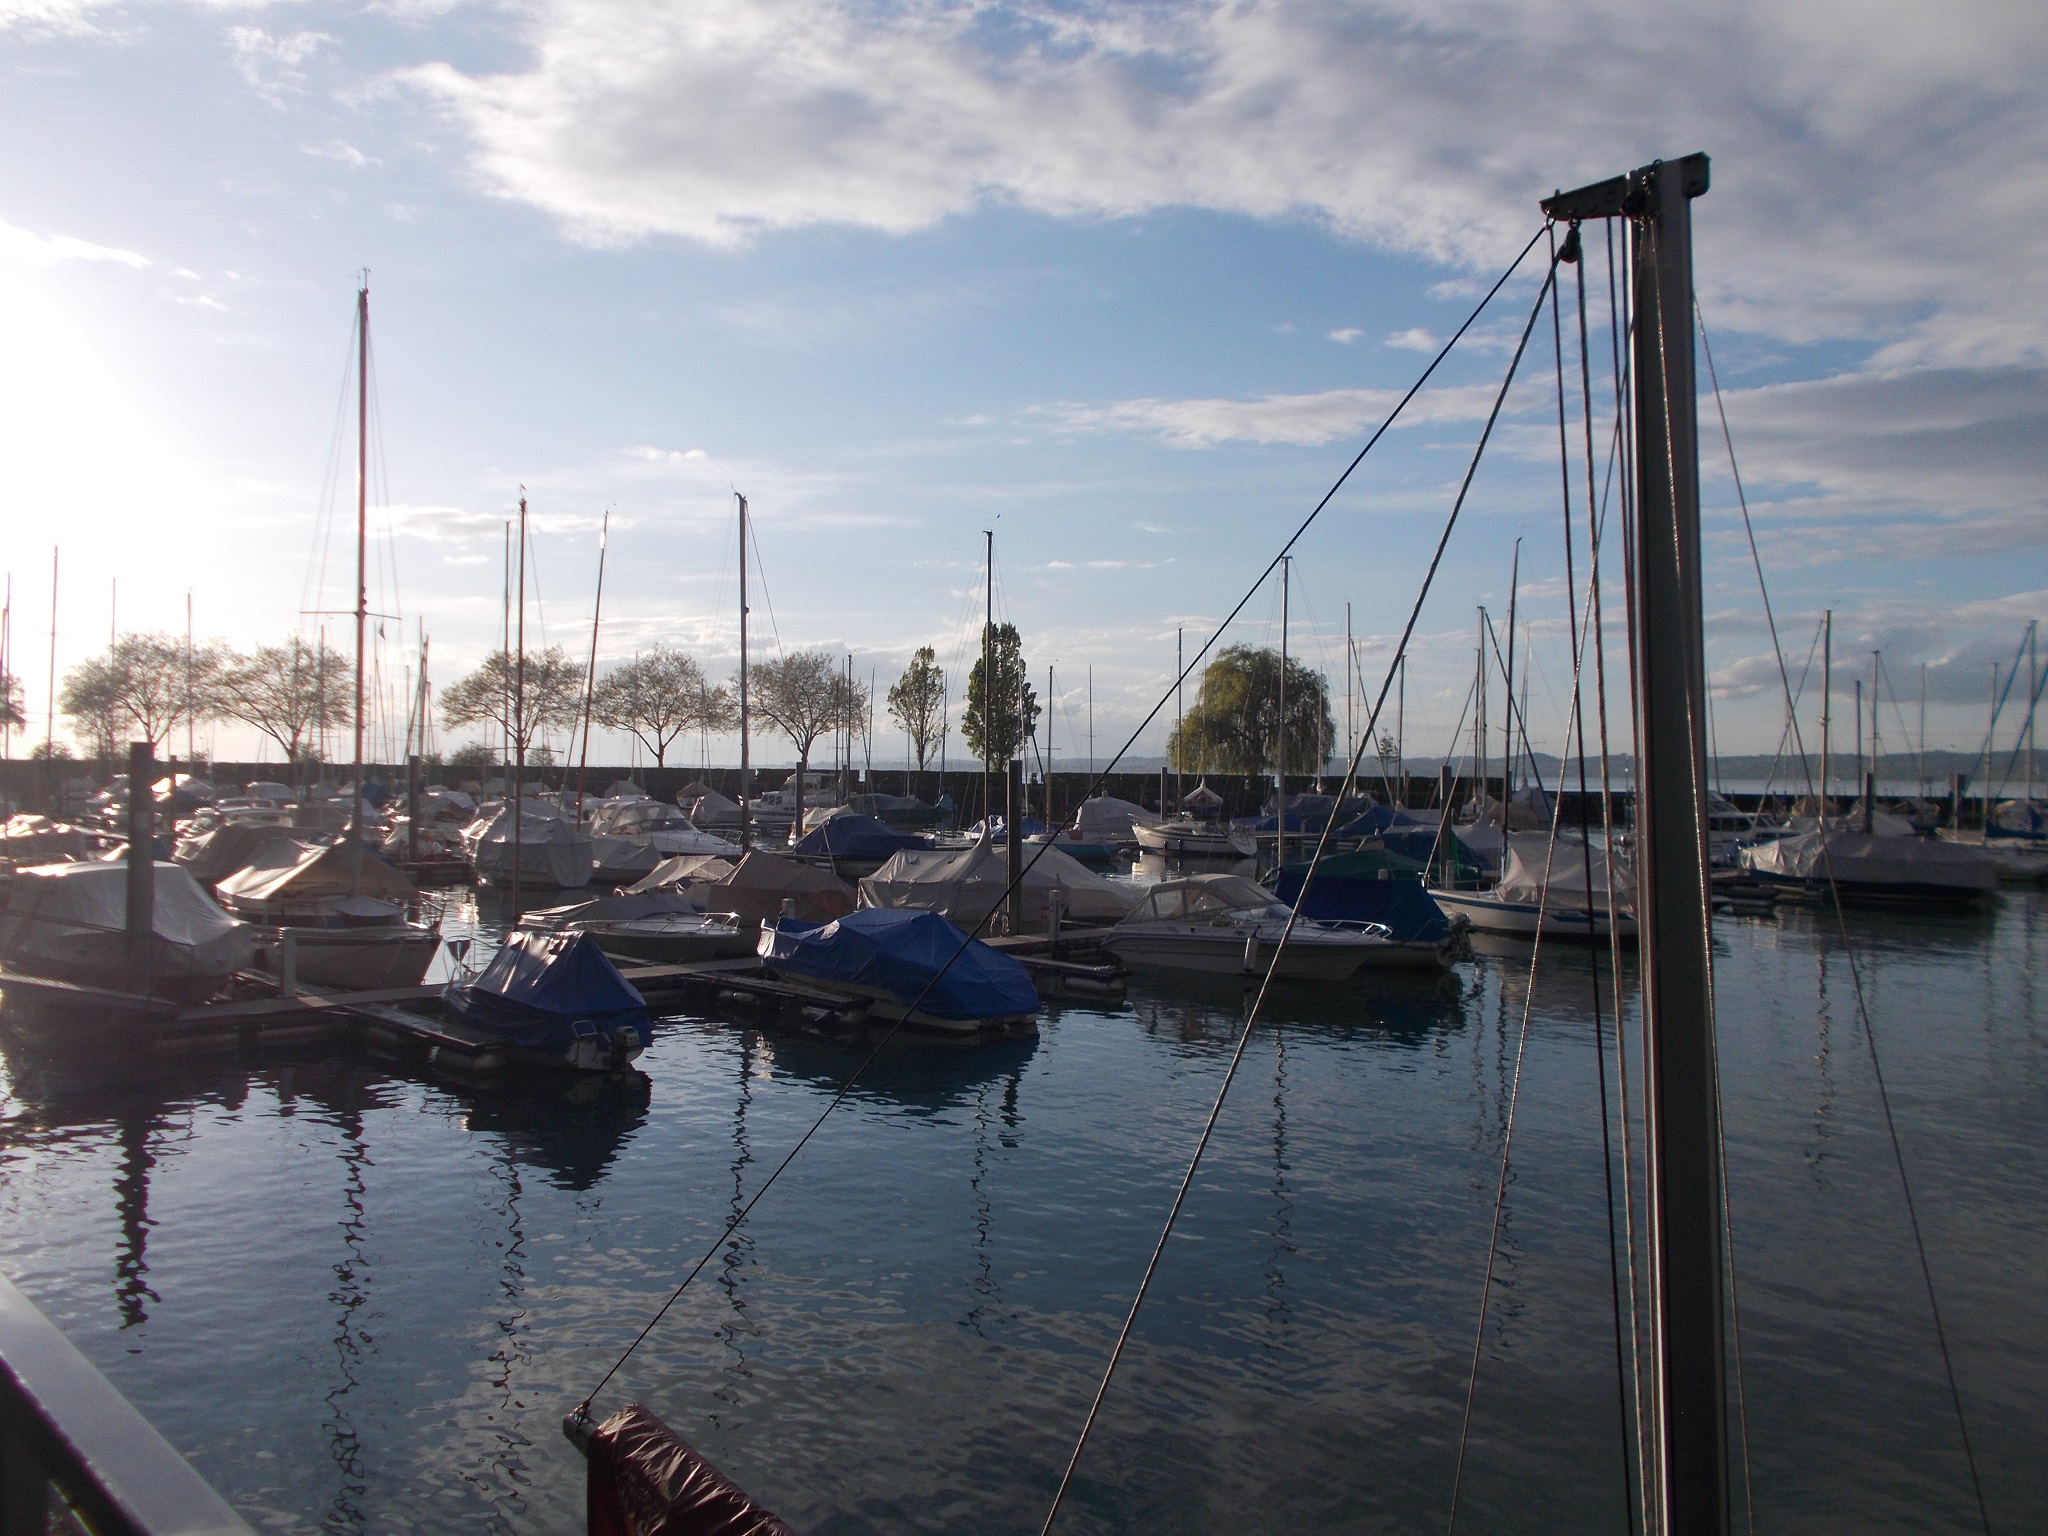 Boats in a small harbour with Lake Constance visible in the background.